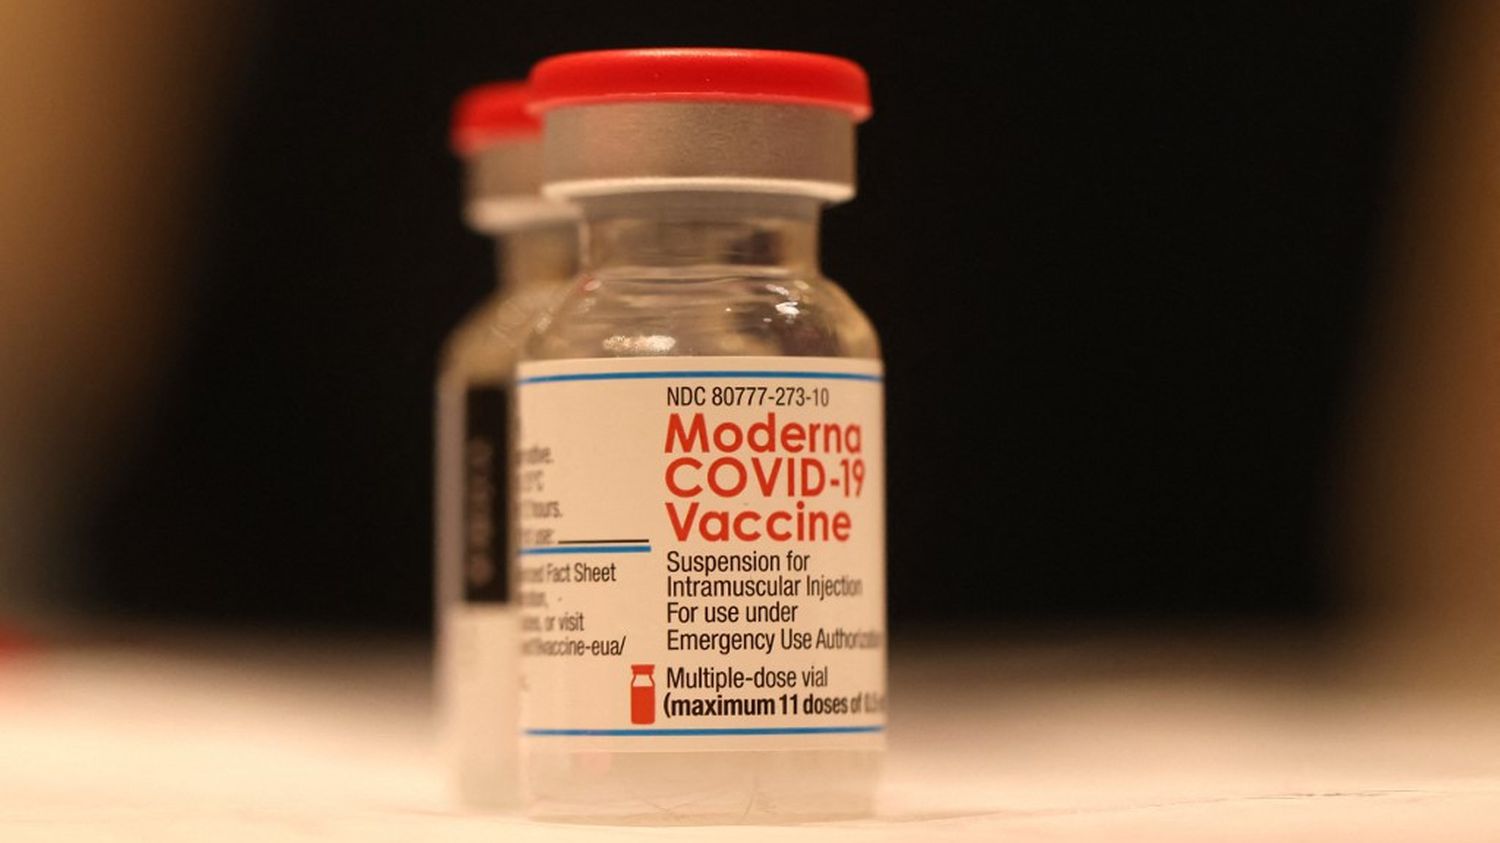 Covid-19: the European Union reserves 15 million doses of the new version of Moderna's vaccine, adapted to the Omicron variant
